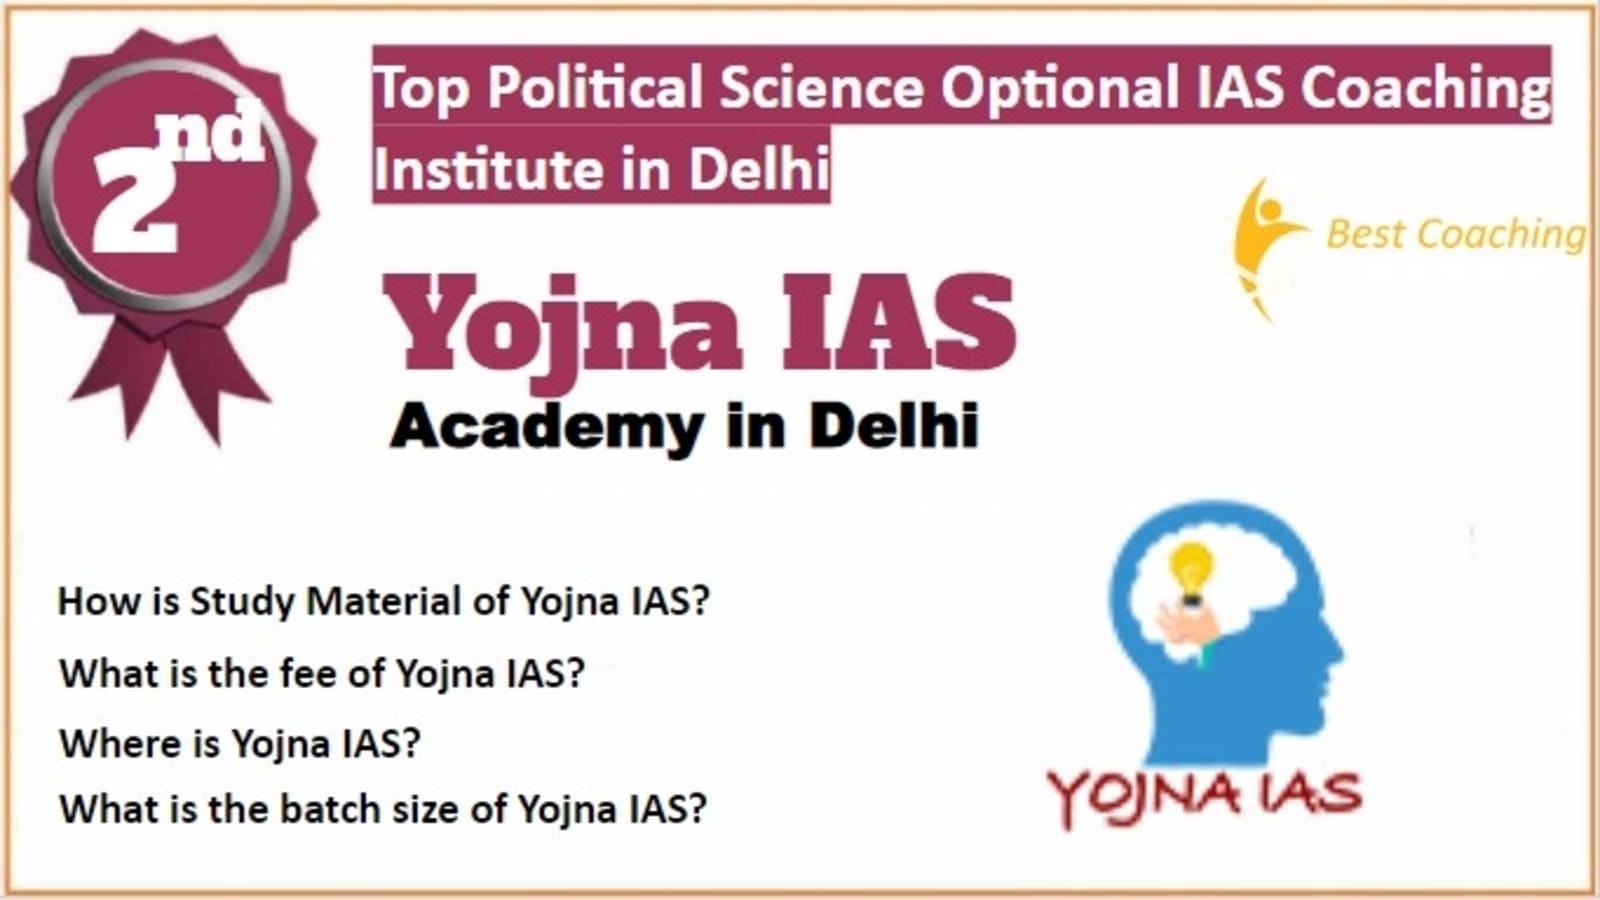 Rank 2 Best Political Science and International Relations Optional IAS Coaching 